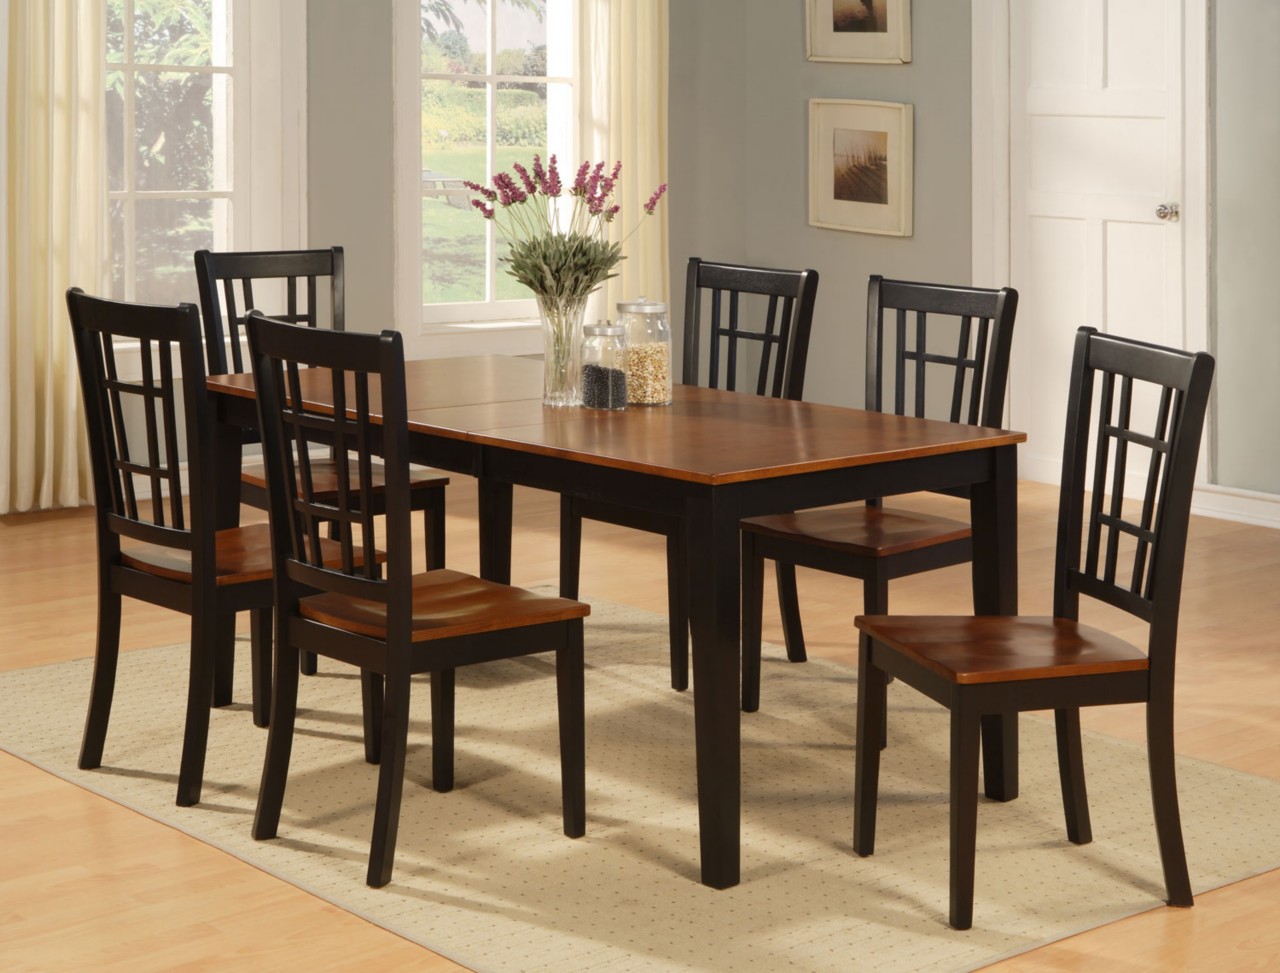 DINETTE KITCHEN DINING ROOM SET 7PC TABLE AND 6 CHAIRS | eBay